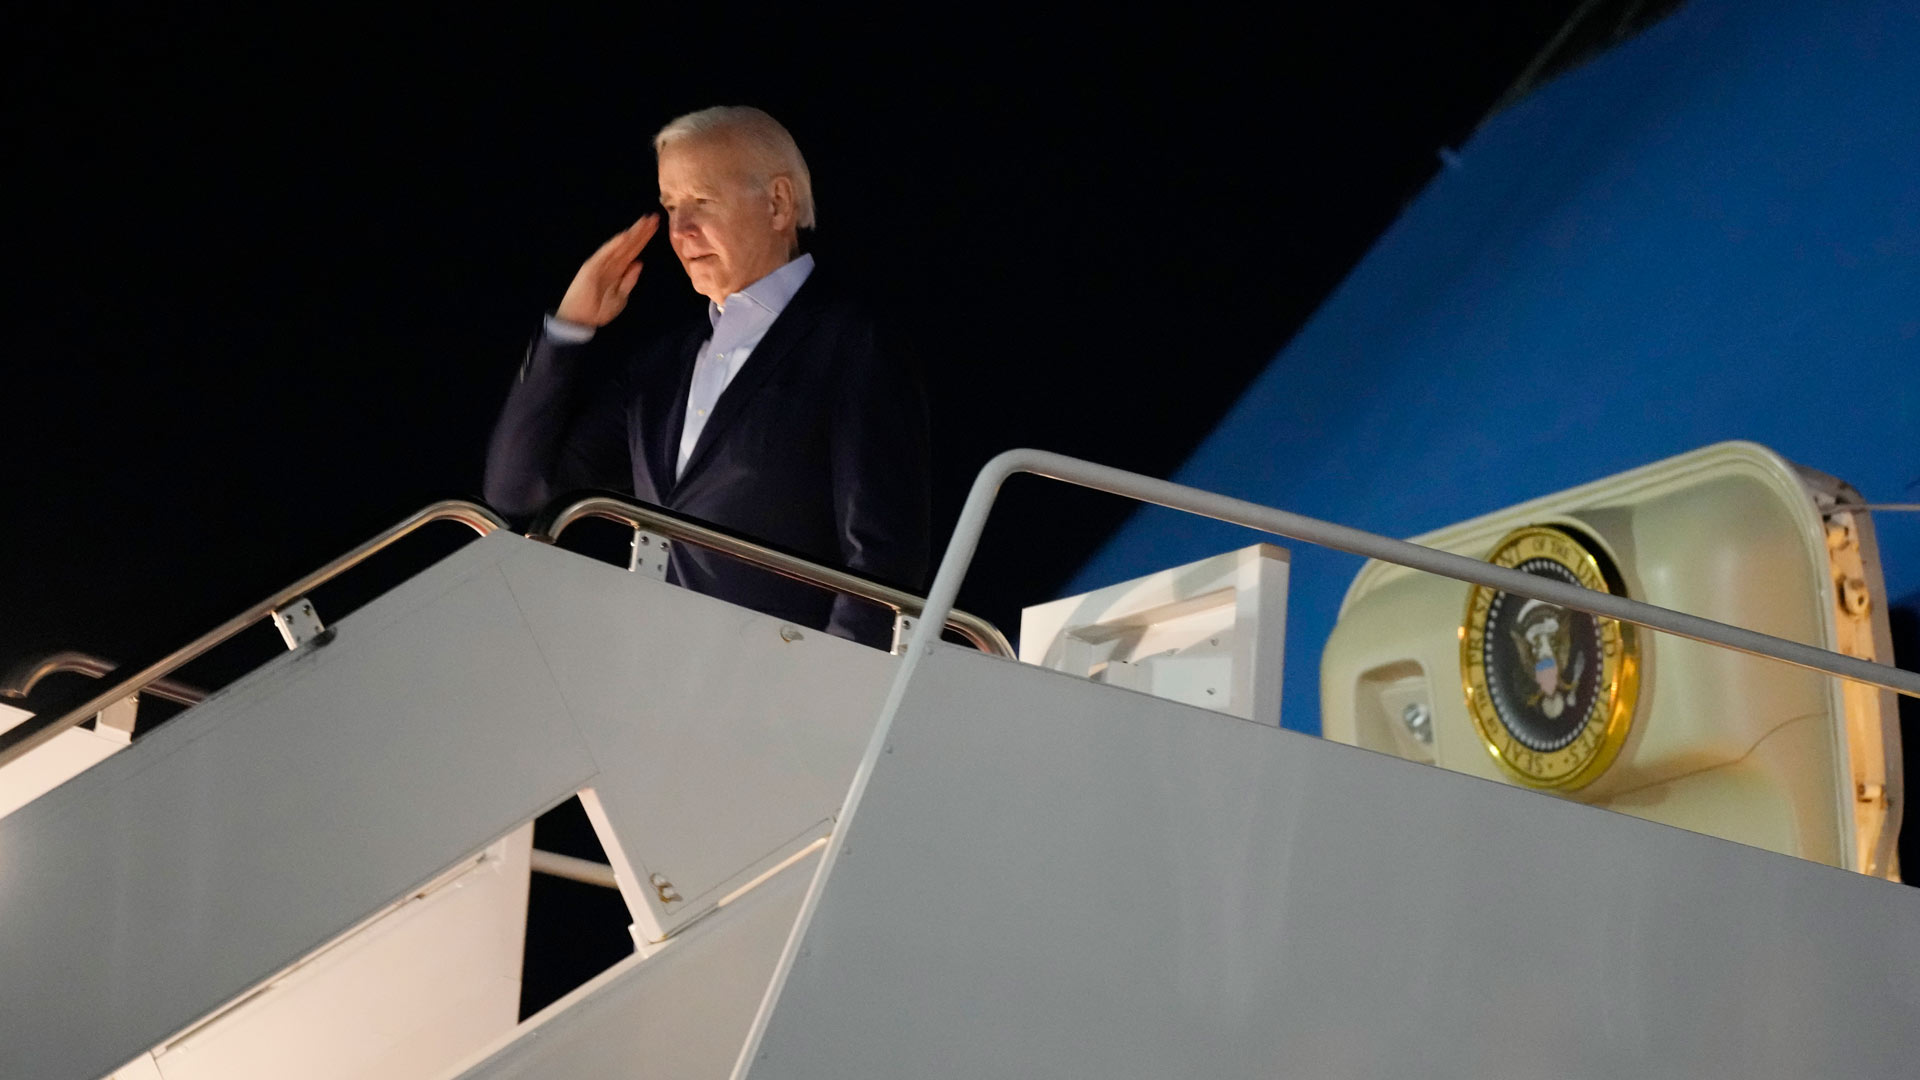 President Joe Biden salutes as he boards Air Force One at Andrews Air Force Base, Md., on Tuesday, Dec. 27, 2022.